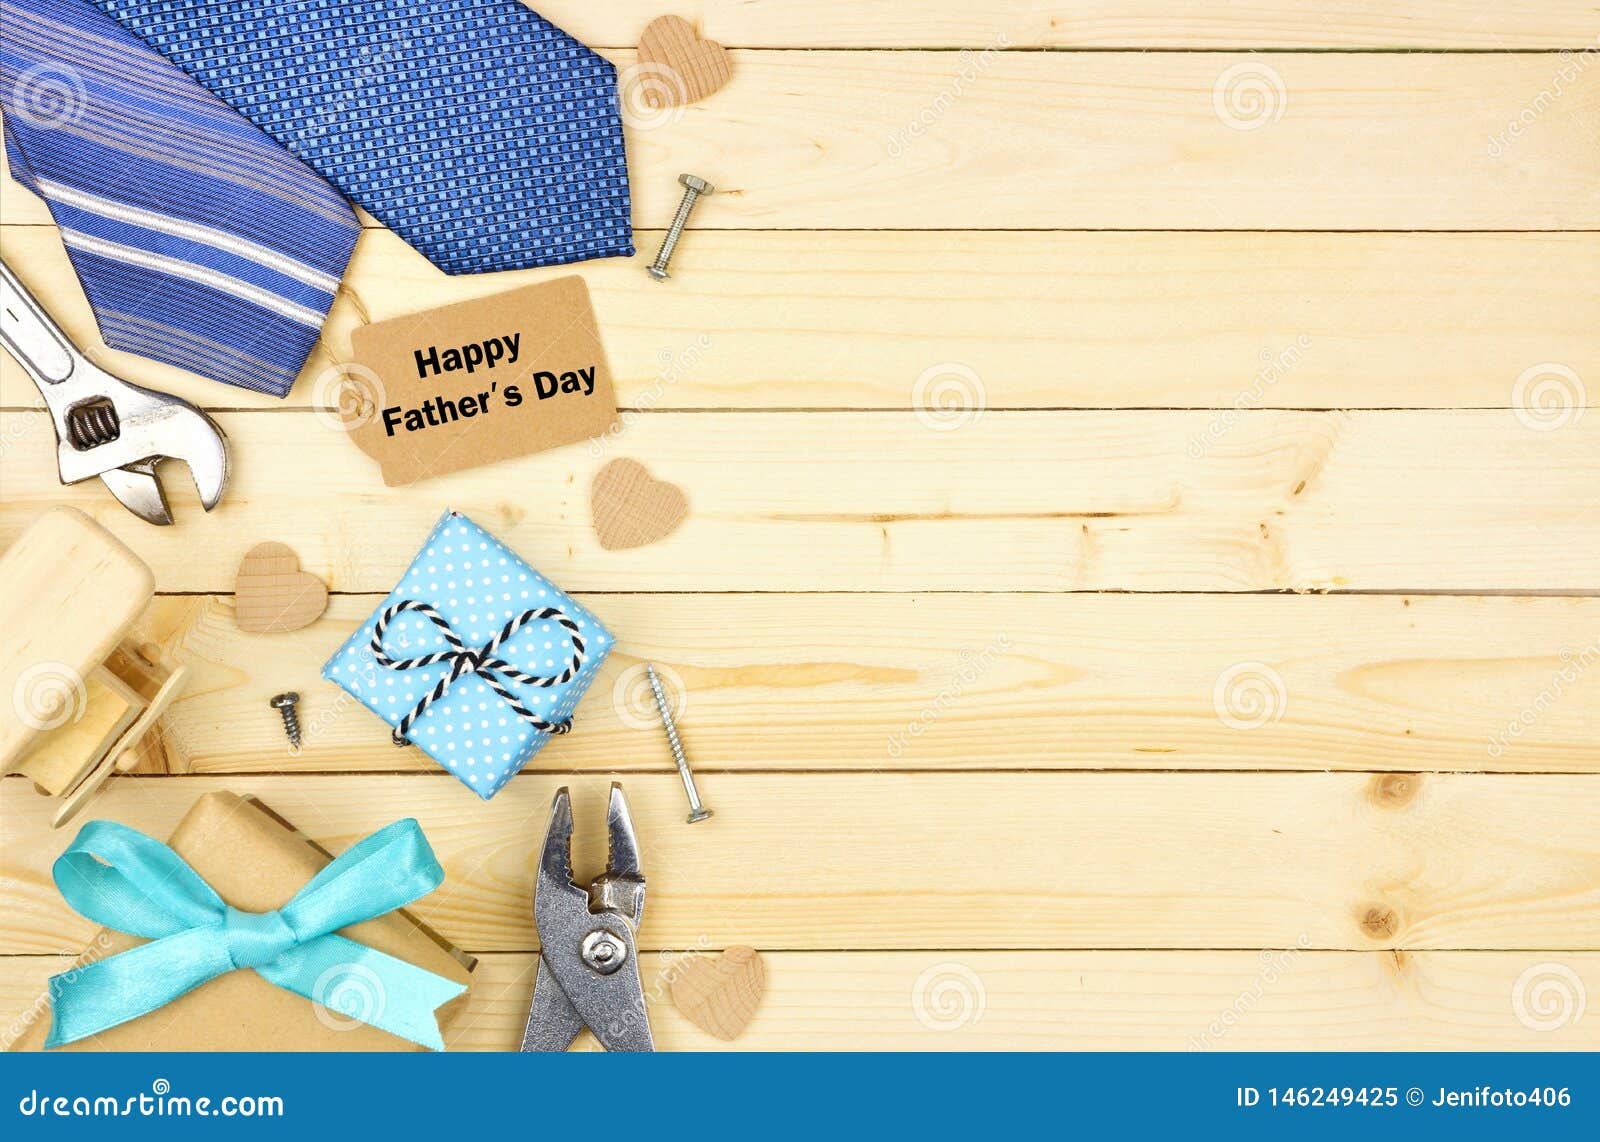 Happy Fathers Day Card and Side Border on a Natural Wood Background Stock  Image - Image of frame, june: 146249425